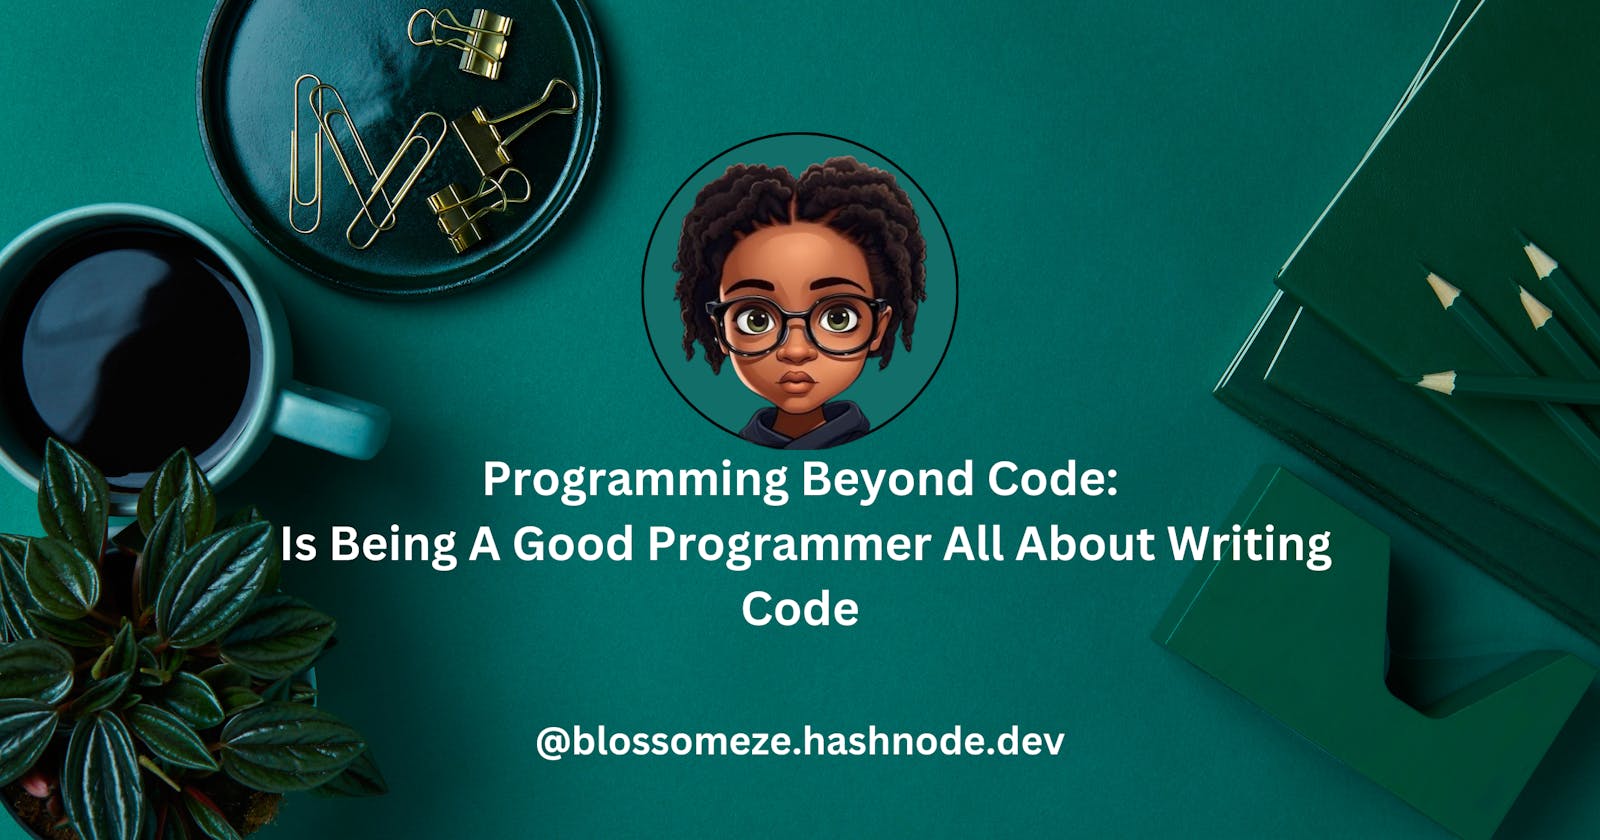 Programming Beyond Code: Is Being A Good Programmer All About Writing Code